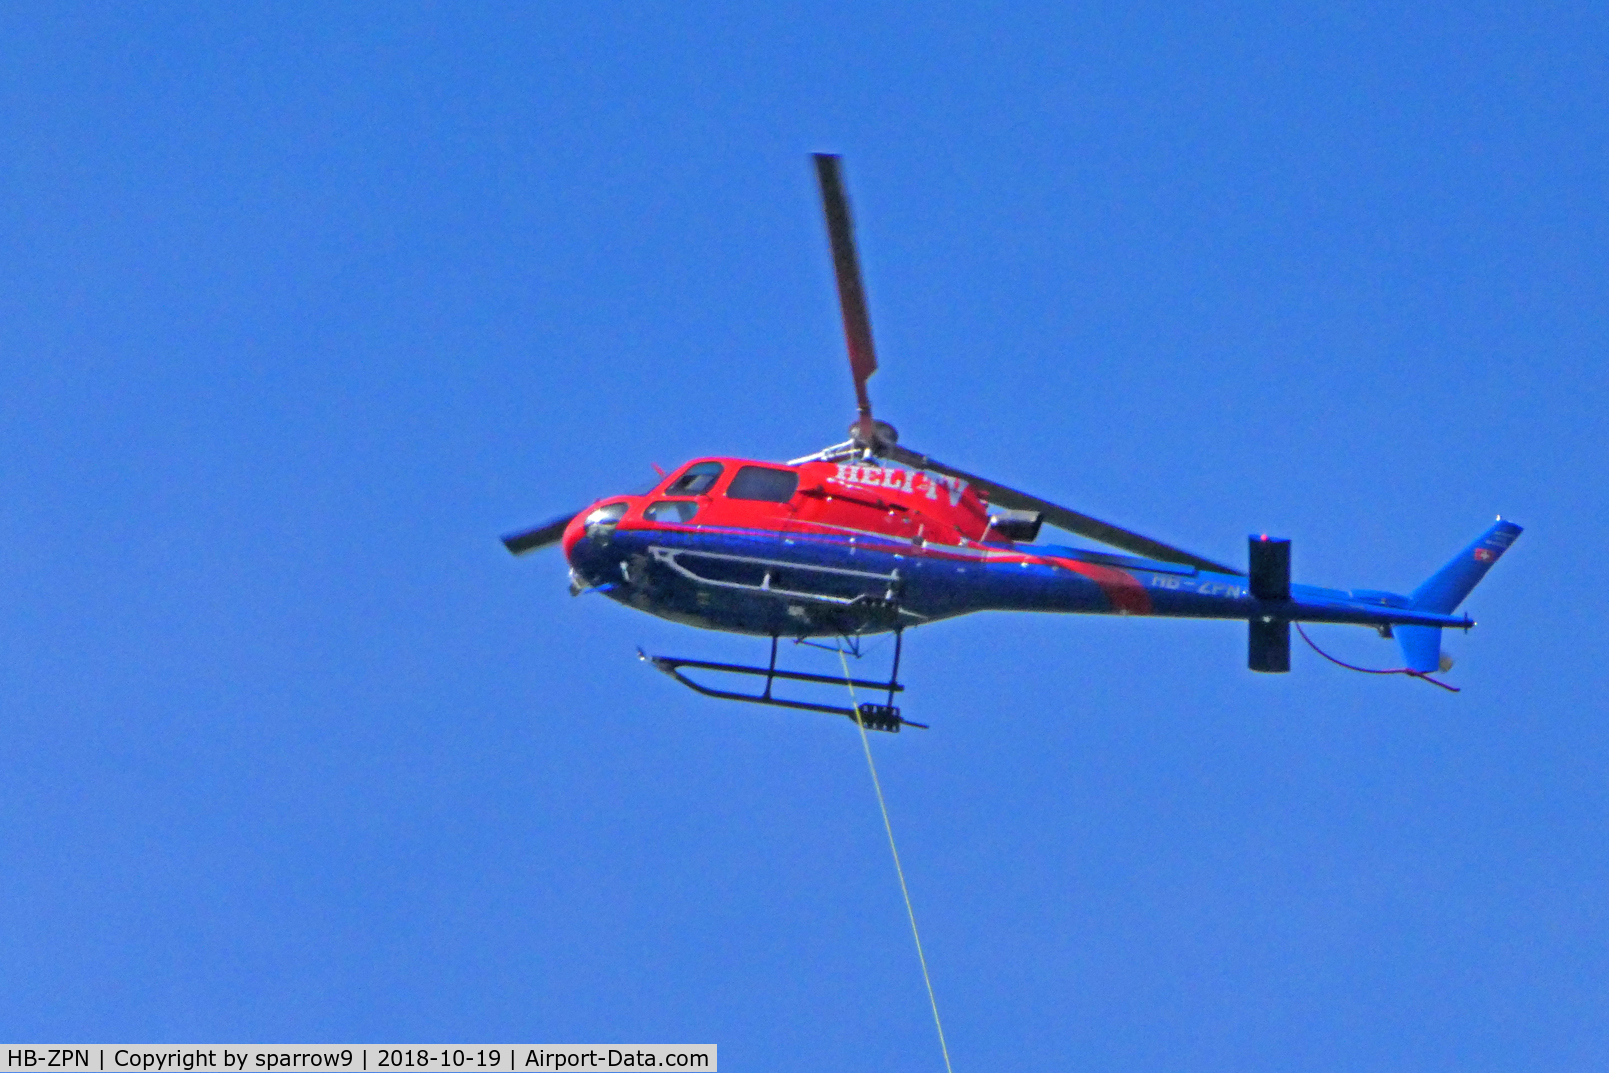 HB-ZPN, 2017 Airbus Helicopters AS-350B-3 Ecureuil C/N 8455, Working near Cavigliano in Centovalli